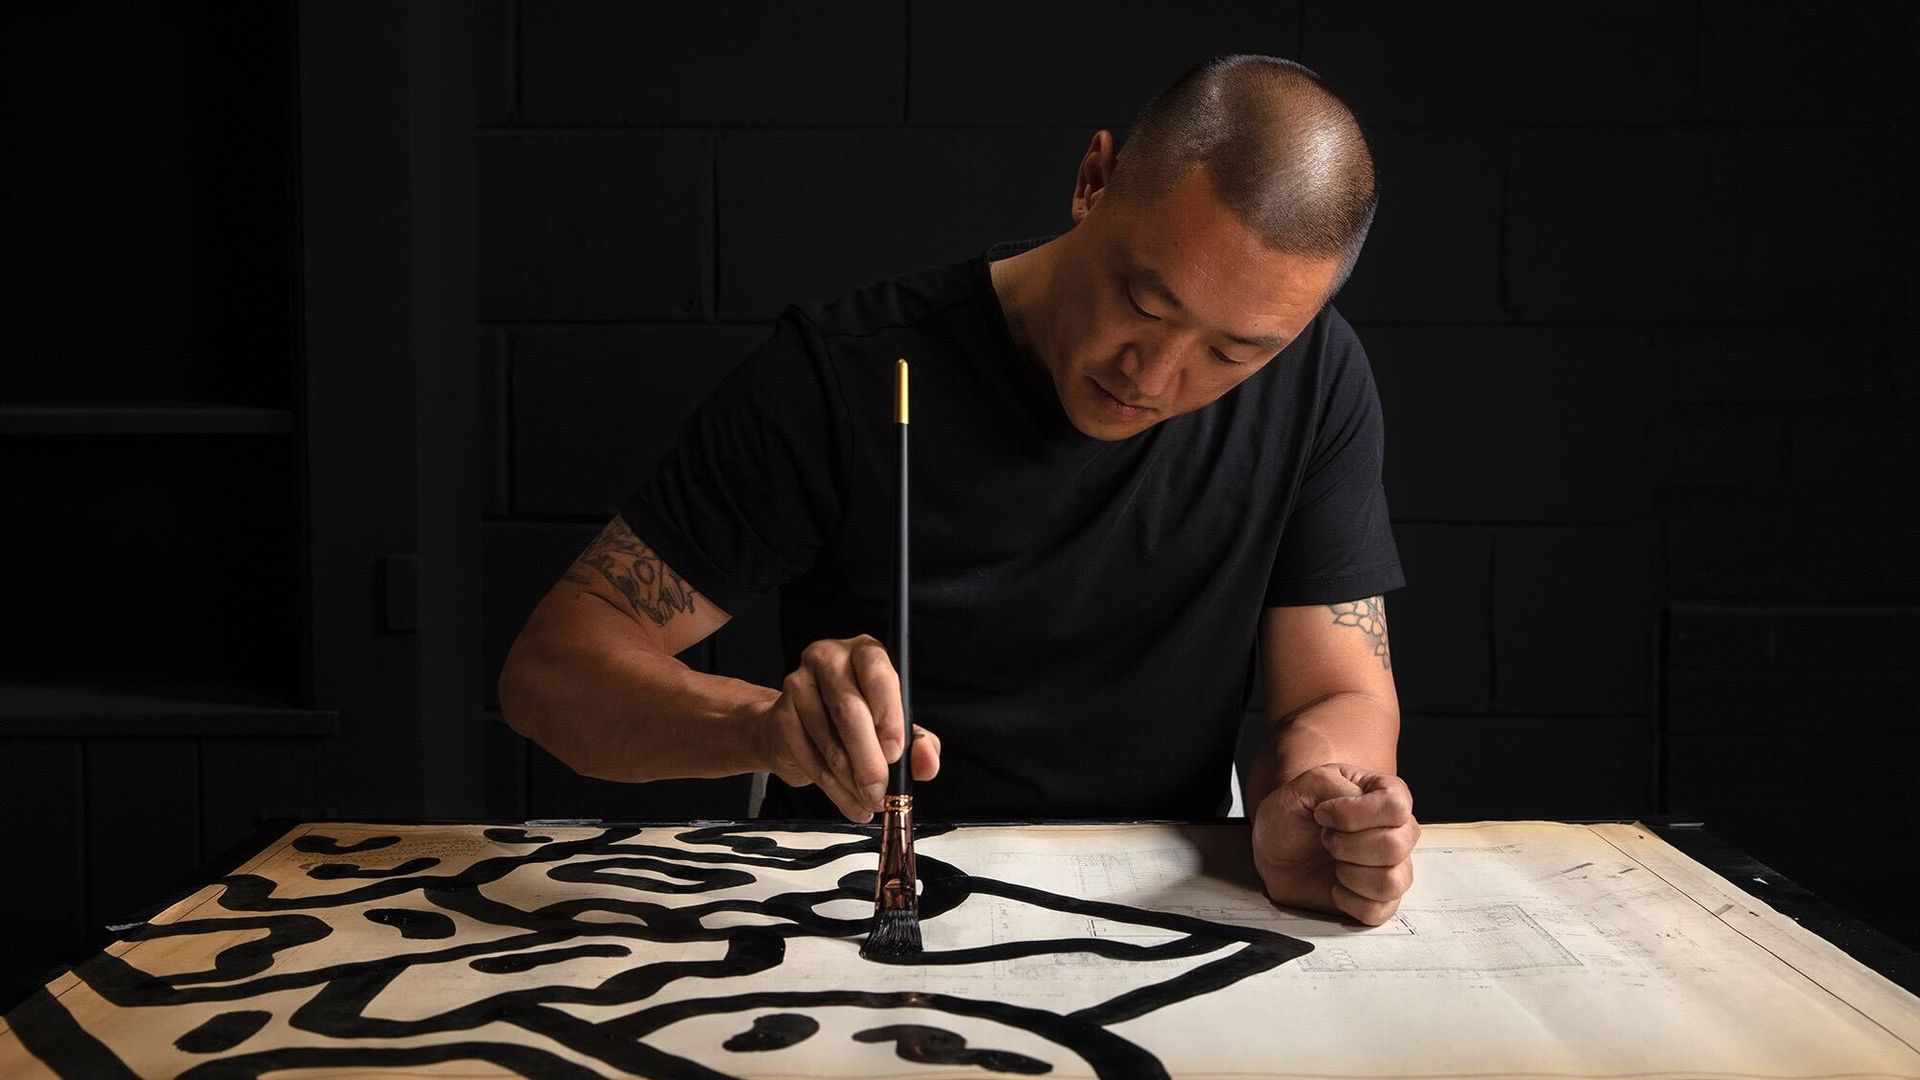 Artist and designer Mike Han holds a paintbrush while working on a piece